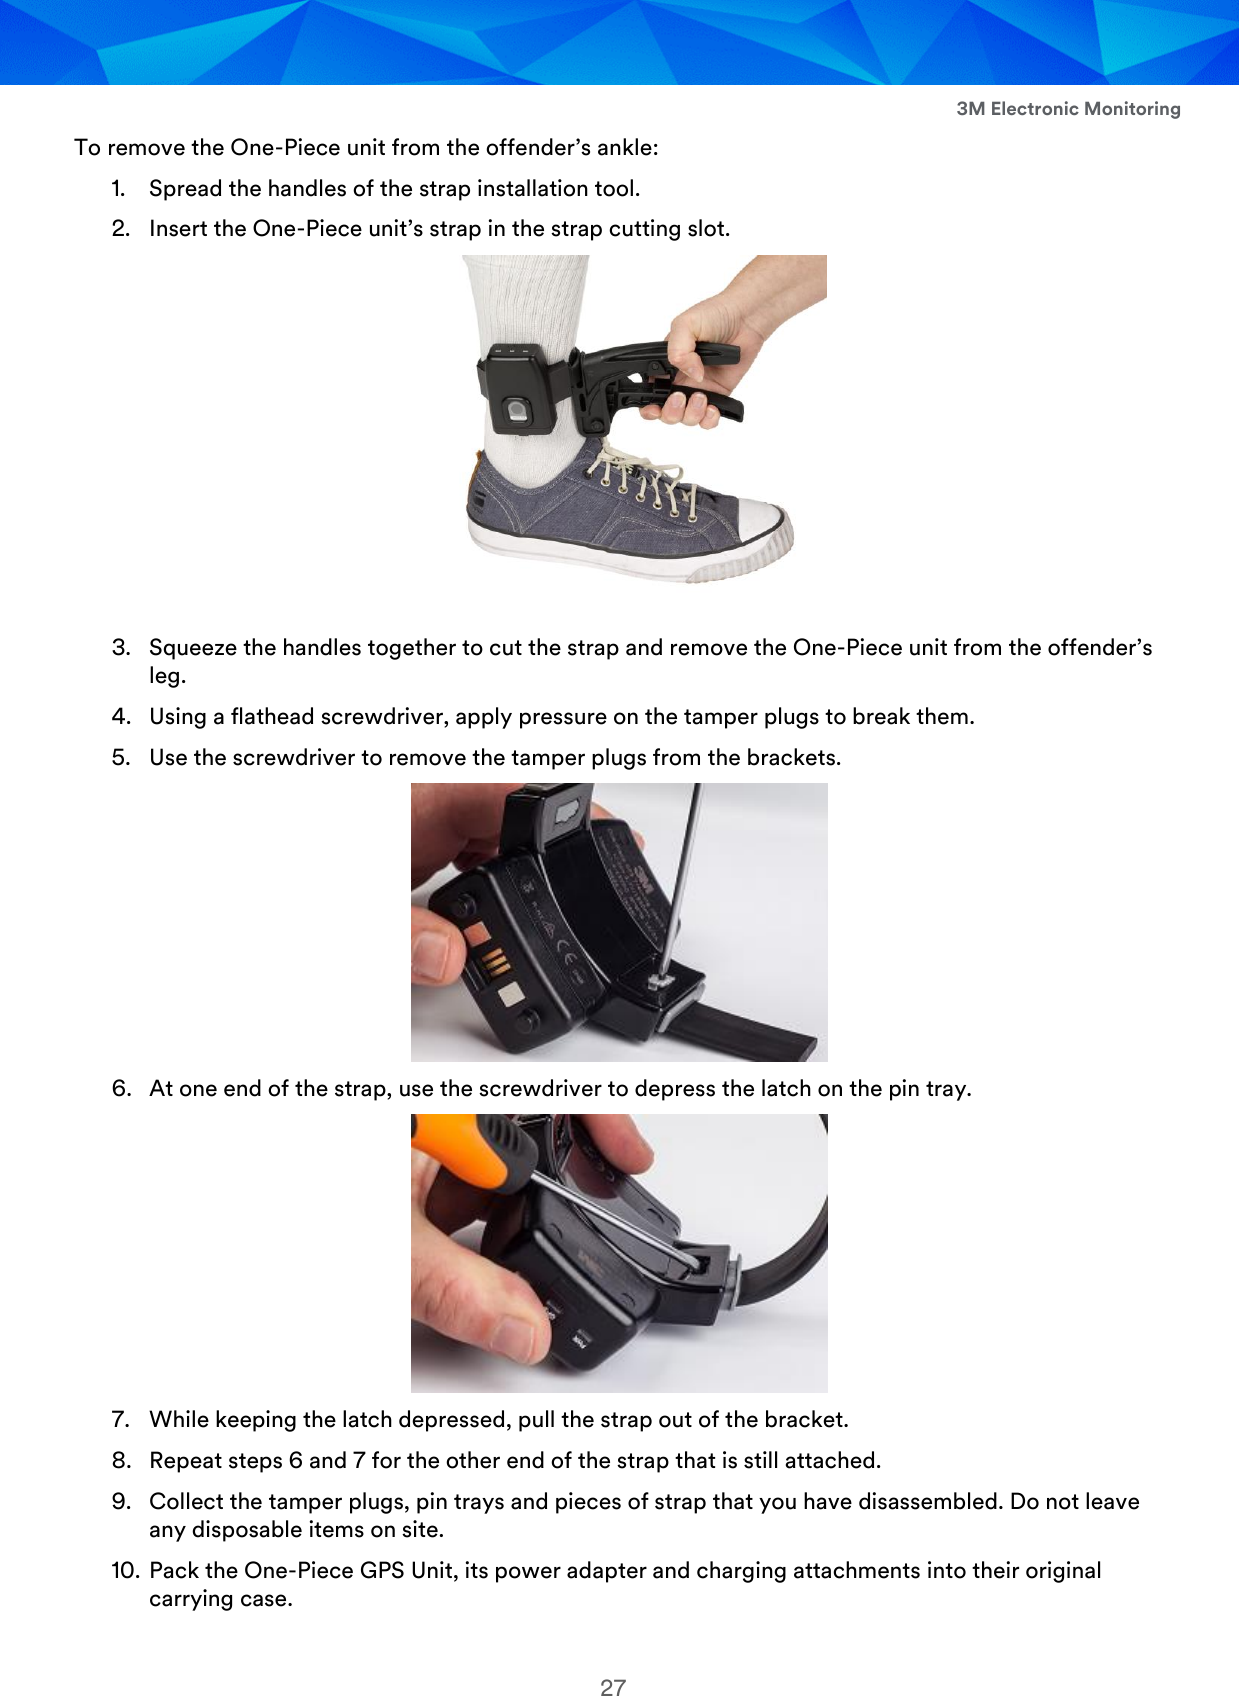  3M Electronic Monitoring 27 To remove the One-Piece unit from the offender’s ankle: 1. Spread the handles of the strap installation tool. 2. Insert the One-Piece unit’s strap in the strap cutting slot.   3. Squeeze the handles together to cut the strap and remove the One-Piece unit from the offender’s leg. 4. Using a flathead screwdriver, apply pressure on the tamper plugs to break them. 5. Use the screwdriver to remove the tamper plugs from the brackets.  6. At one end of the strap, use the screwdriver to depress the latch on the pin tray.  7. While keeping the latch depressed, pull the strap out of the bracket. 8. Repeat steps 6 and 7 for the other end of the strap that is still attached. 9. Collect the tamper plugs, pin trays and pieces of strap that you have disassembled. Do not leave any disposable items on site. 10. Pack the One-Piece GPS Unit, its power adapter and charging attachments into their original carrying case. 